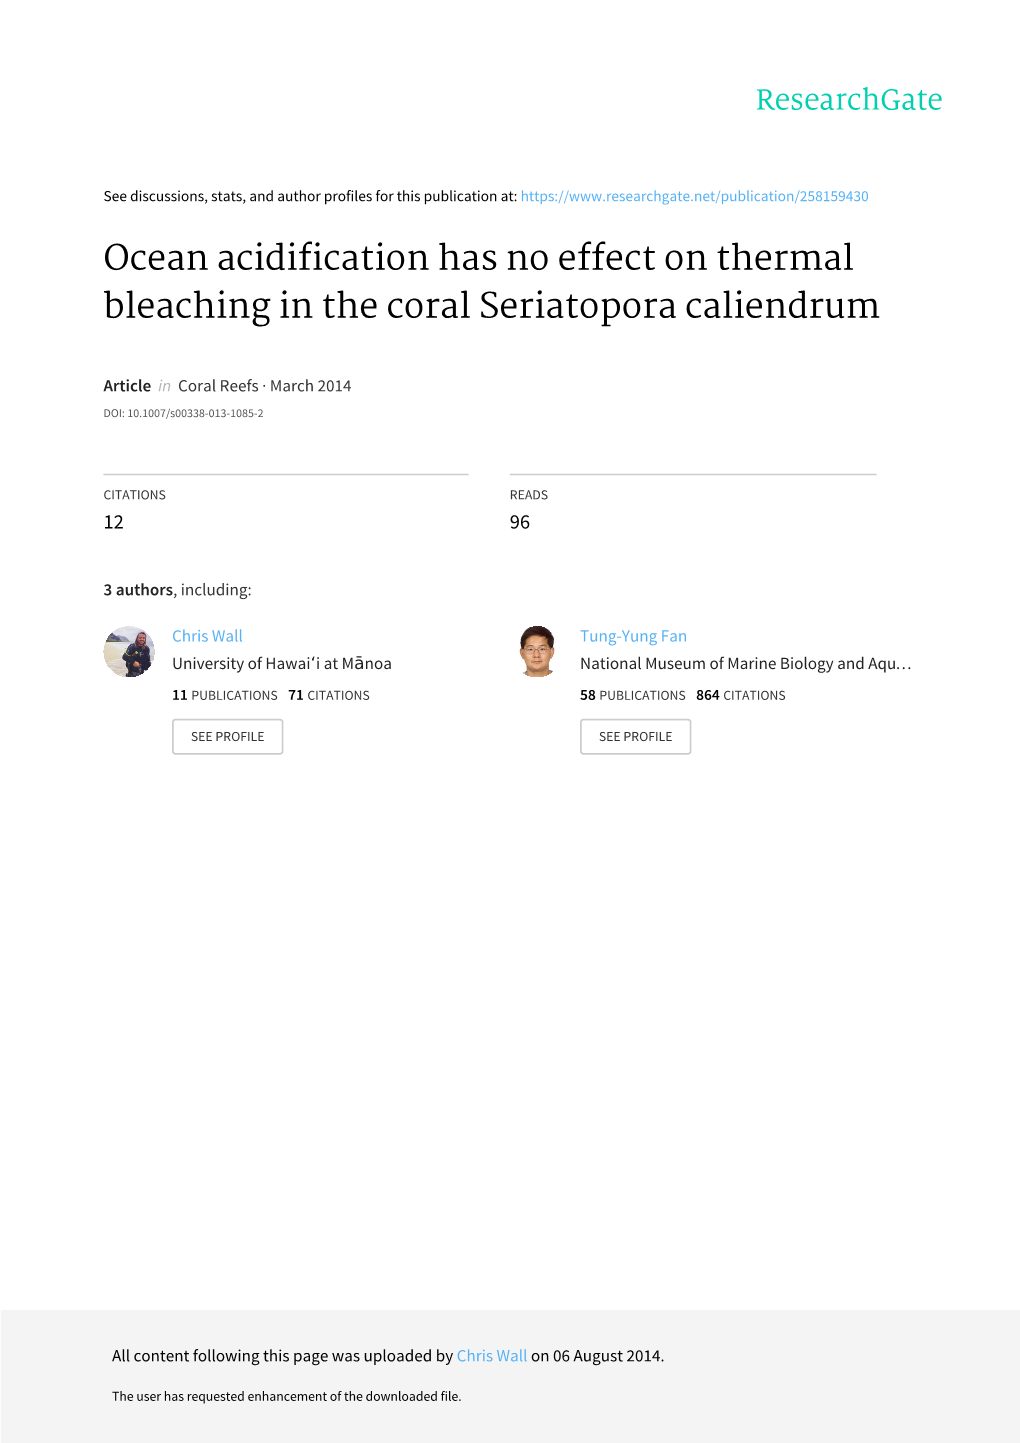 Ocean Acidification Has No Effect on Thermal Bleaching in the Coral Seriatopora Caliendrum